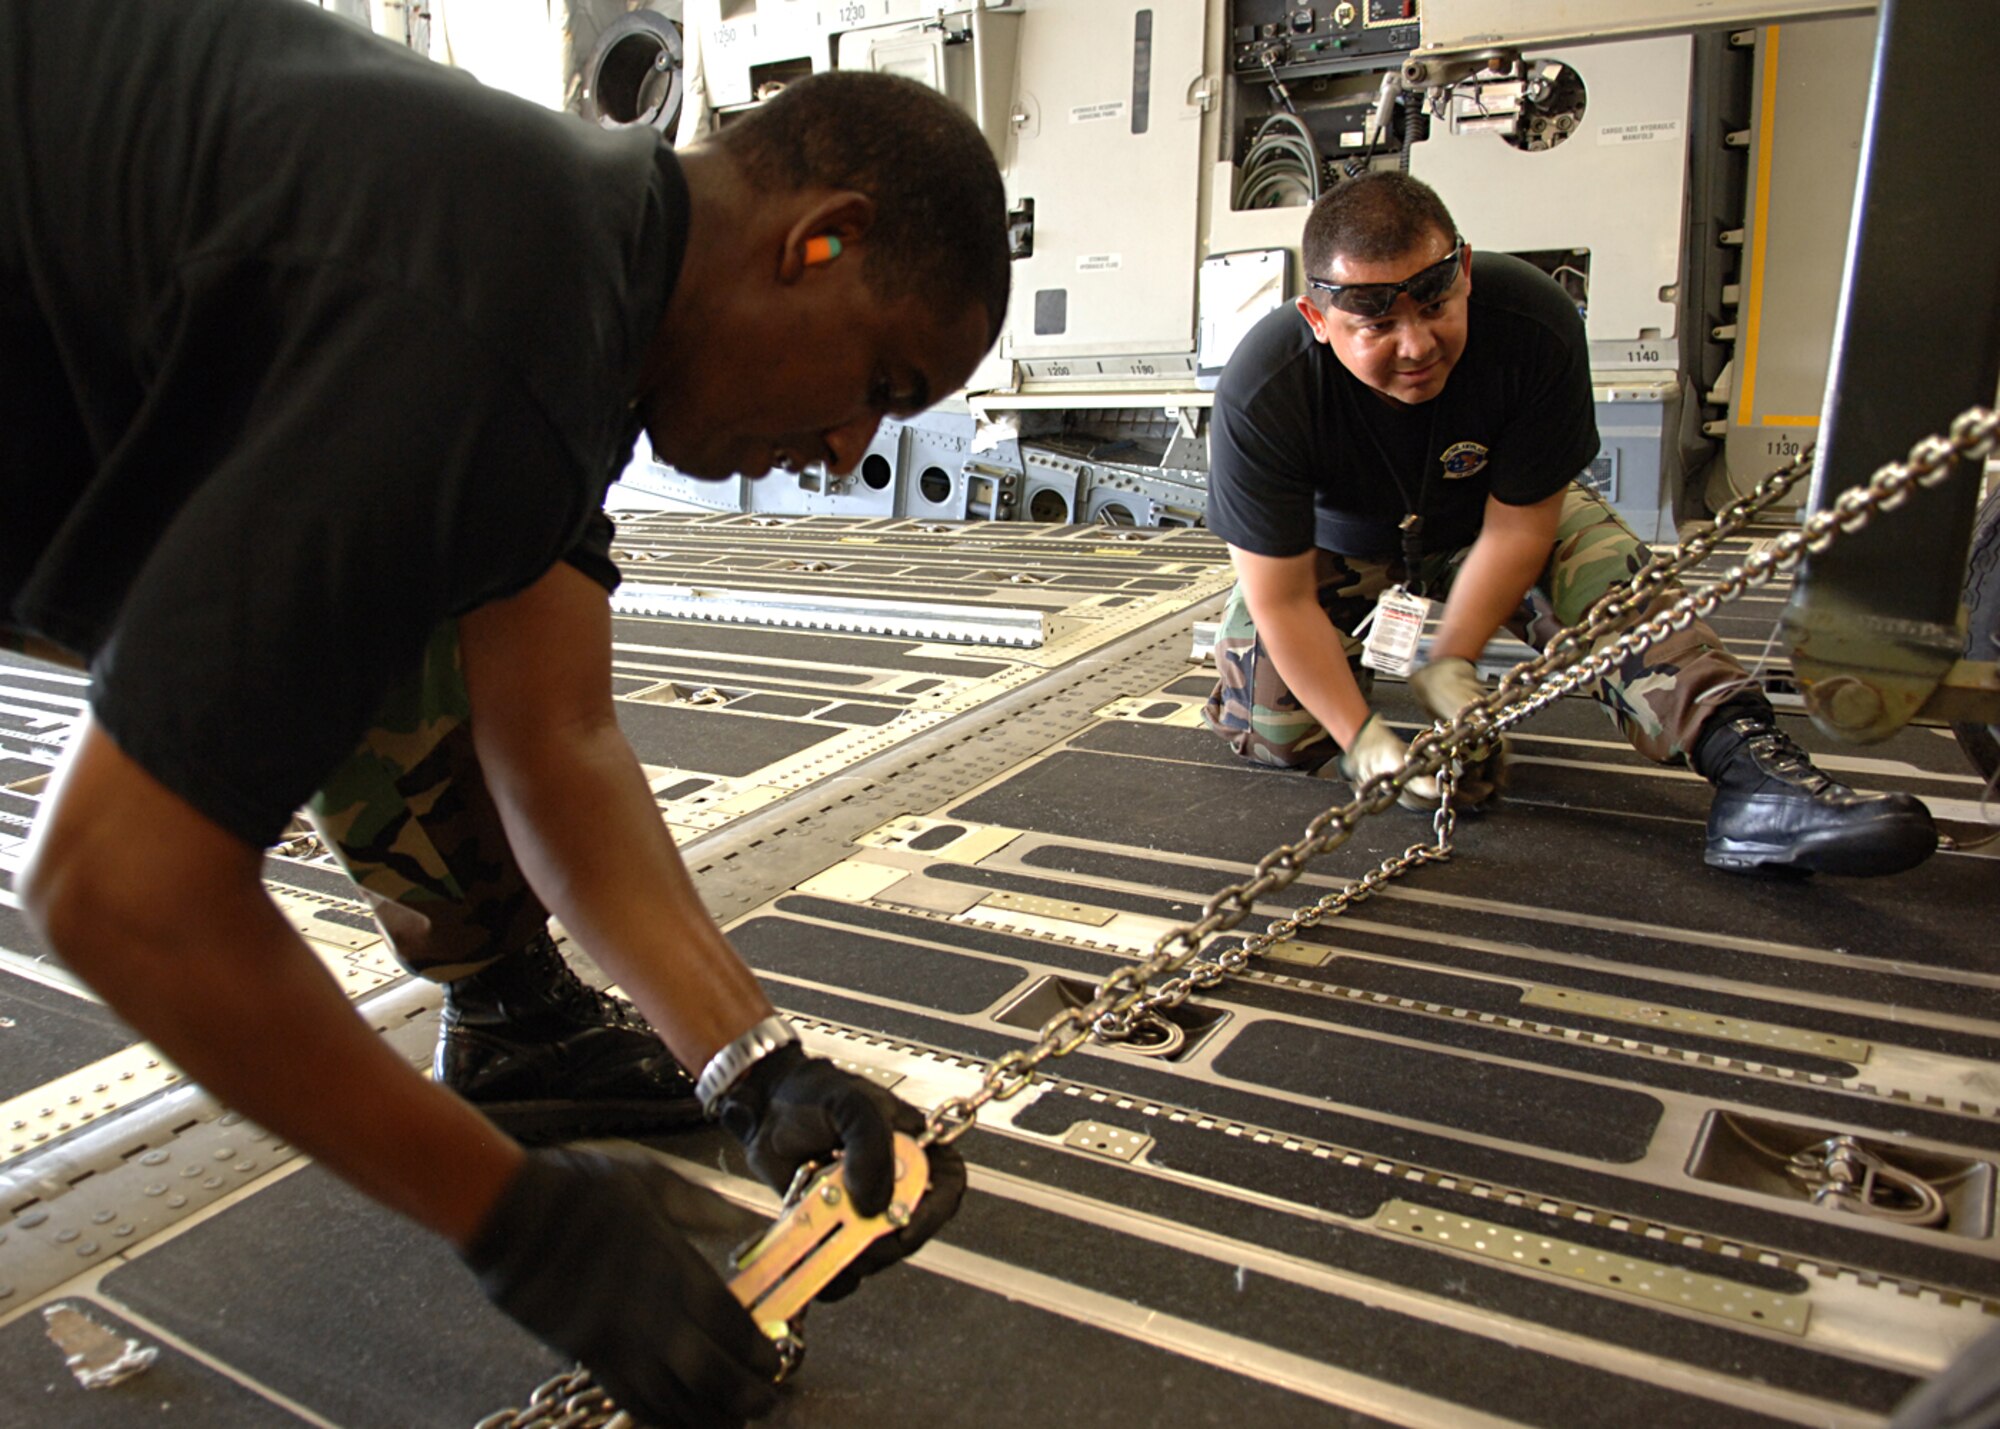 Tech. Sgt.'s Ramon Moss and Nolverto Nieto Jr., 49th Logistics Readiness Squadron, secure the last pieces of the F-117A at Holloman Air Force Base, N.M.   The last of the F-117A was sent to the U.S. Air Force Museum.  (U.S. Air Force photo by Airman 1st Class John D. Strong II)